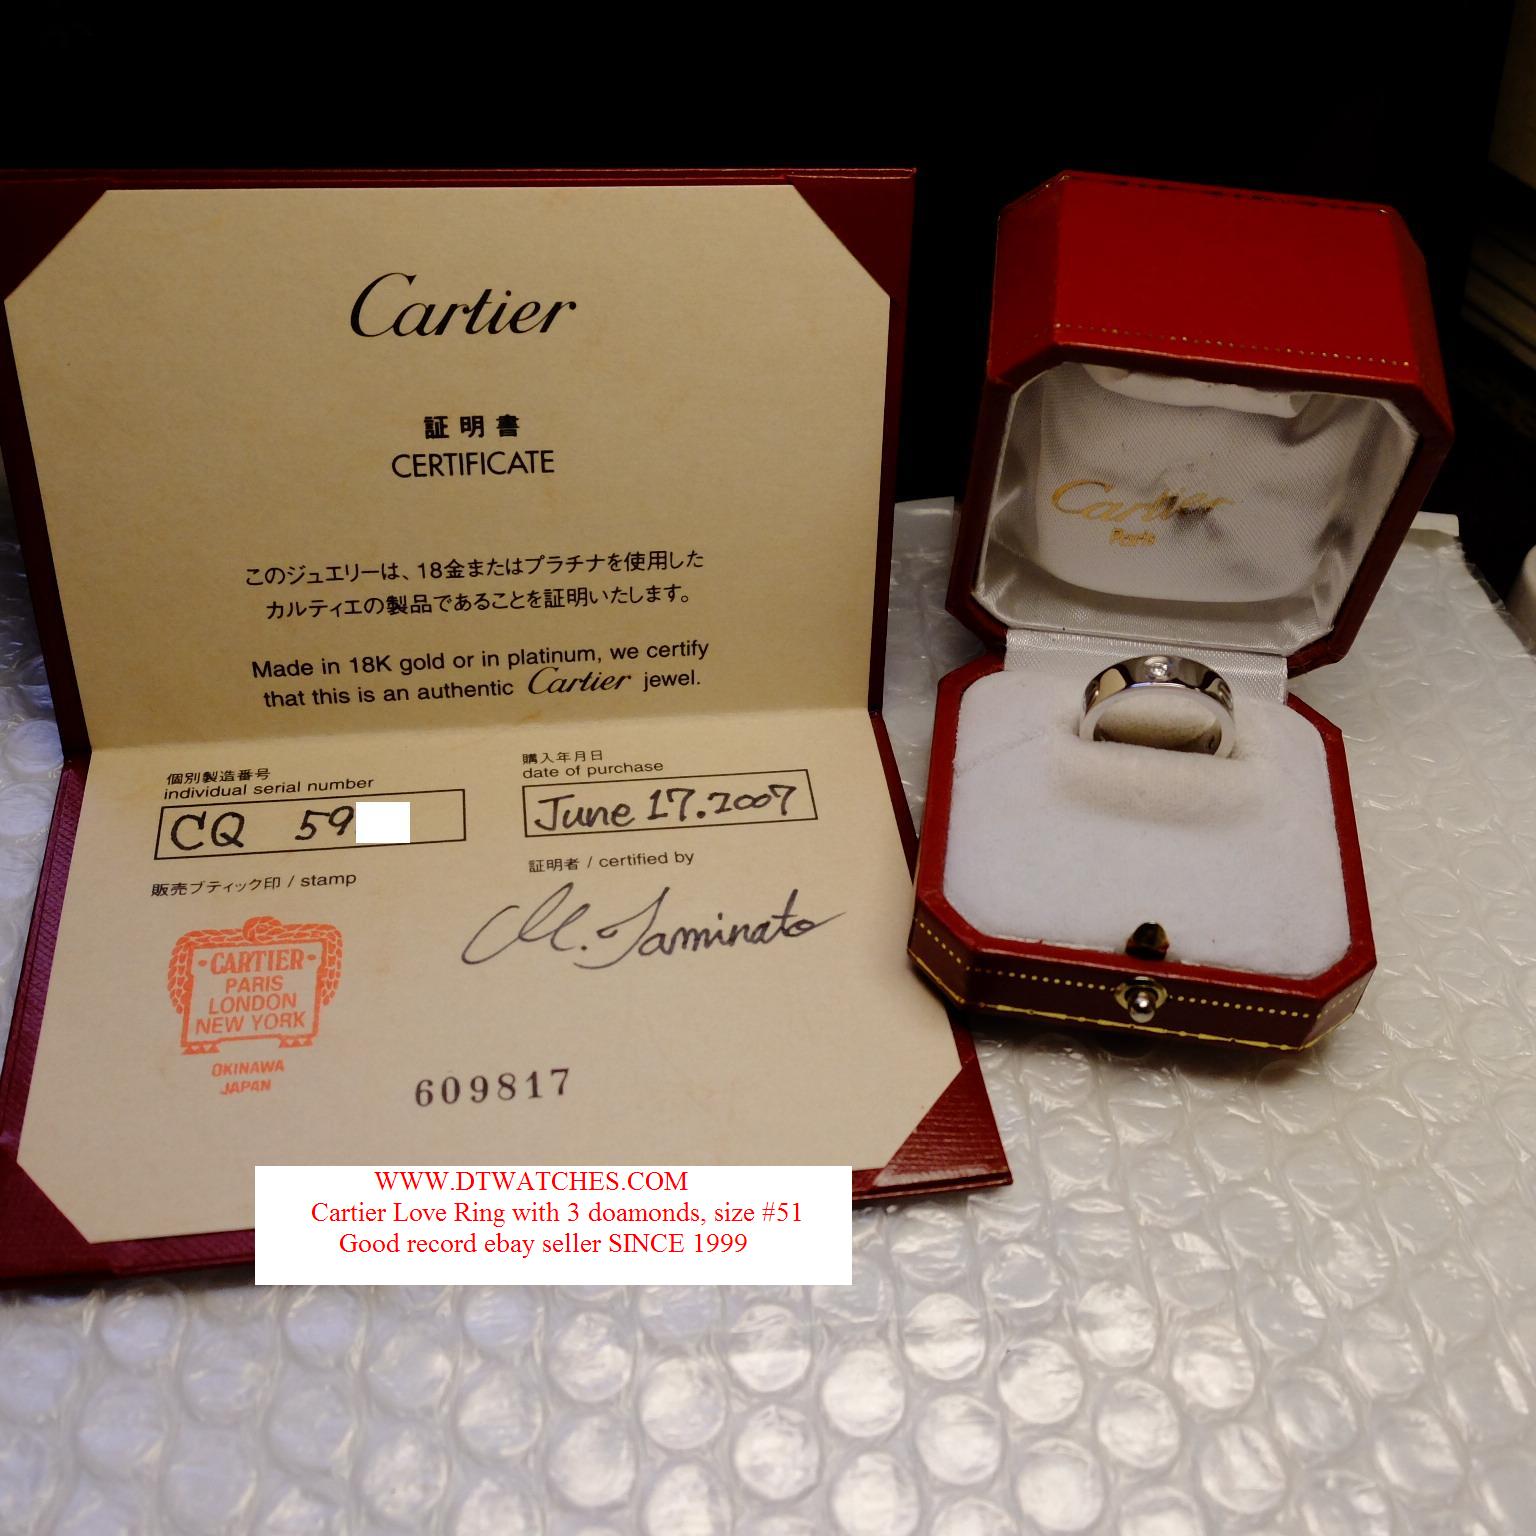 how much is cartier love ring in malaysia